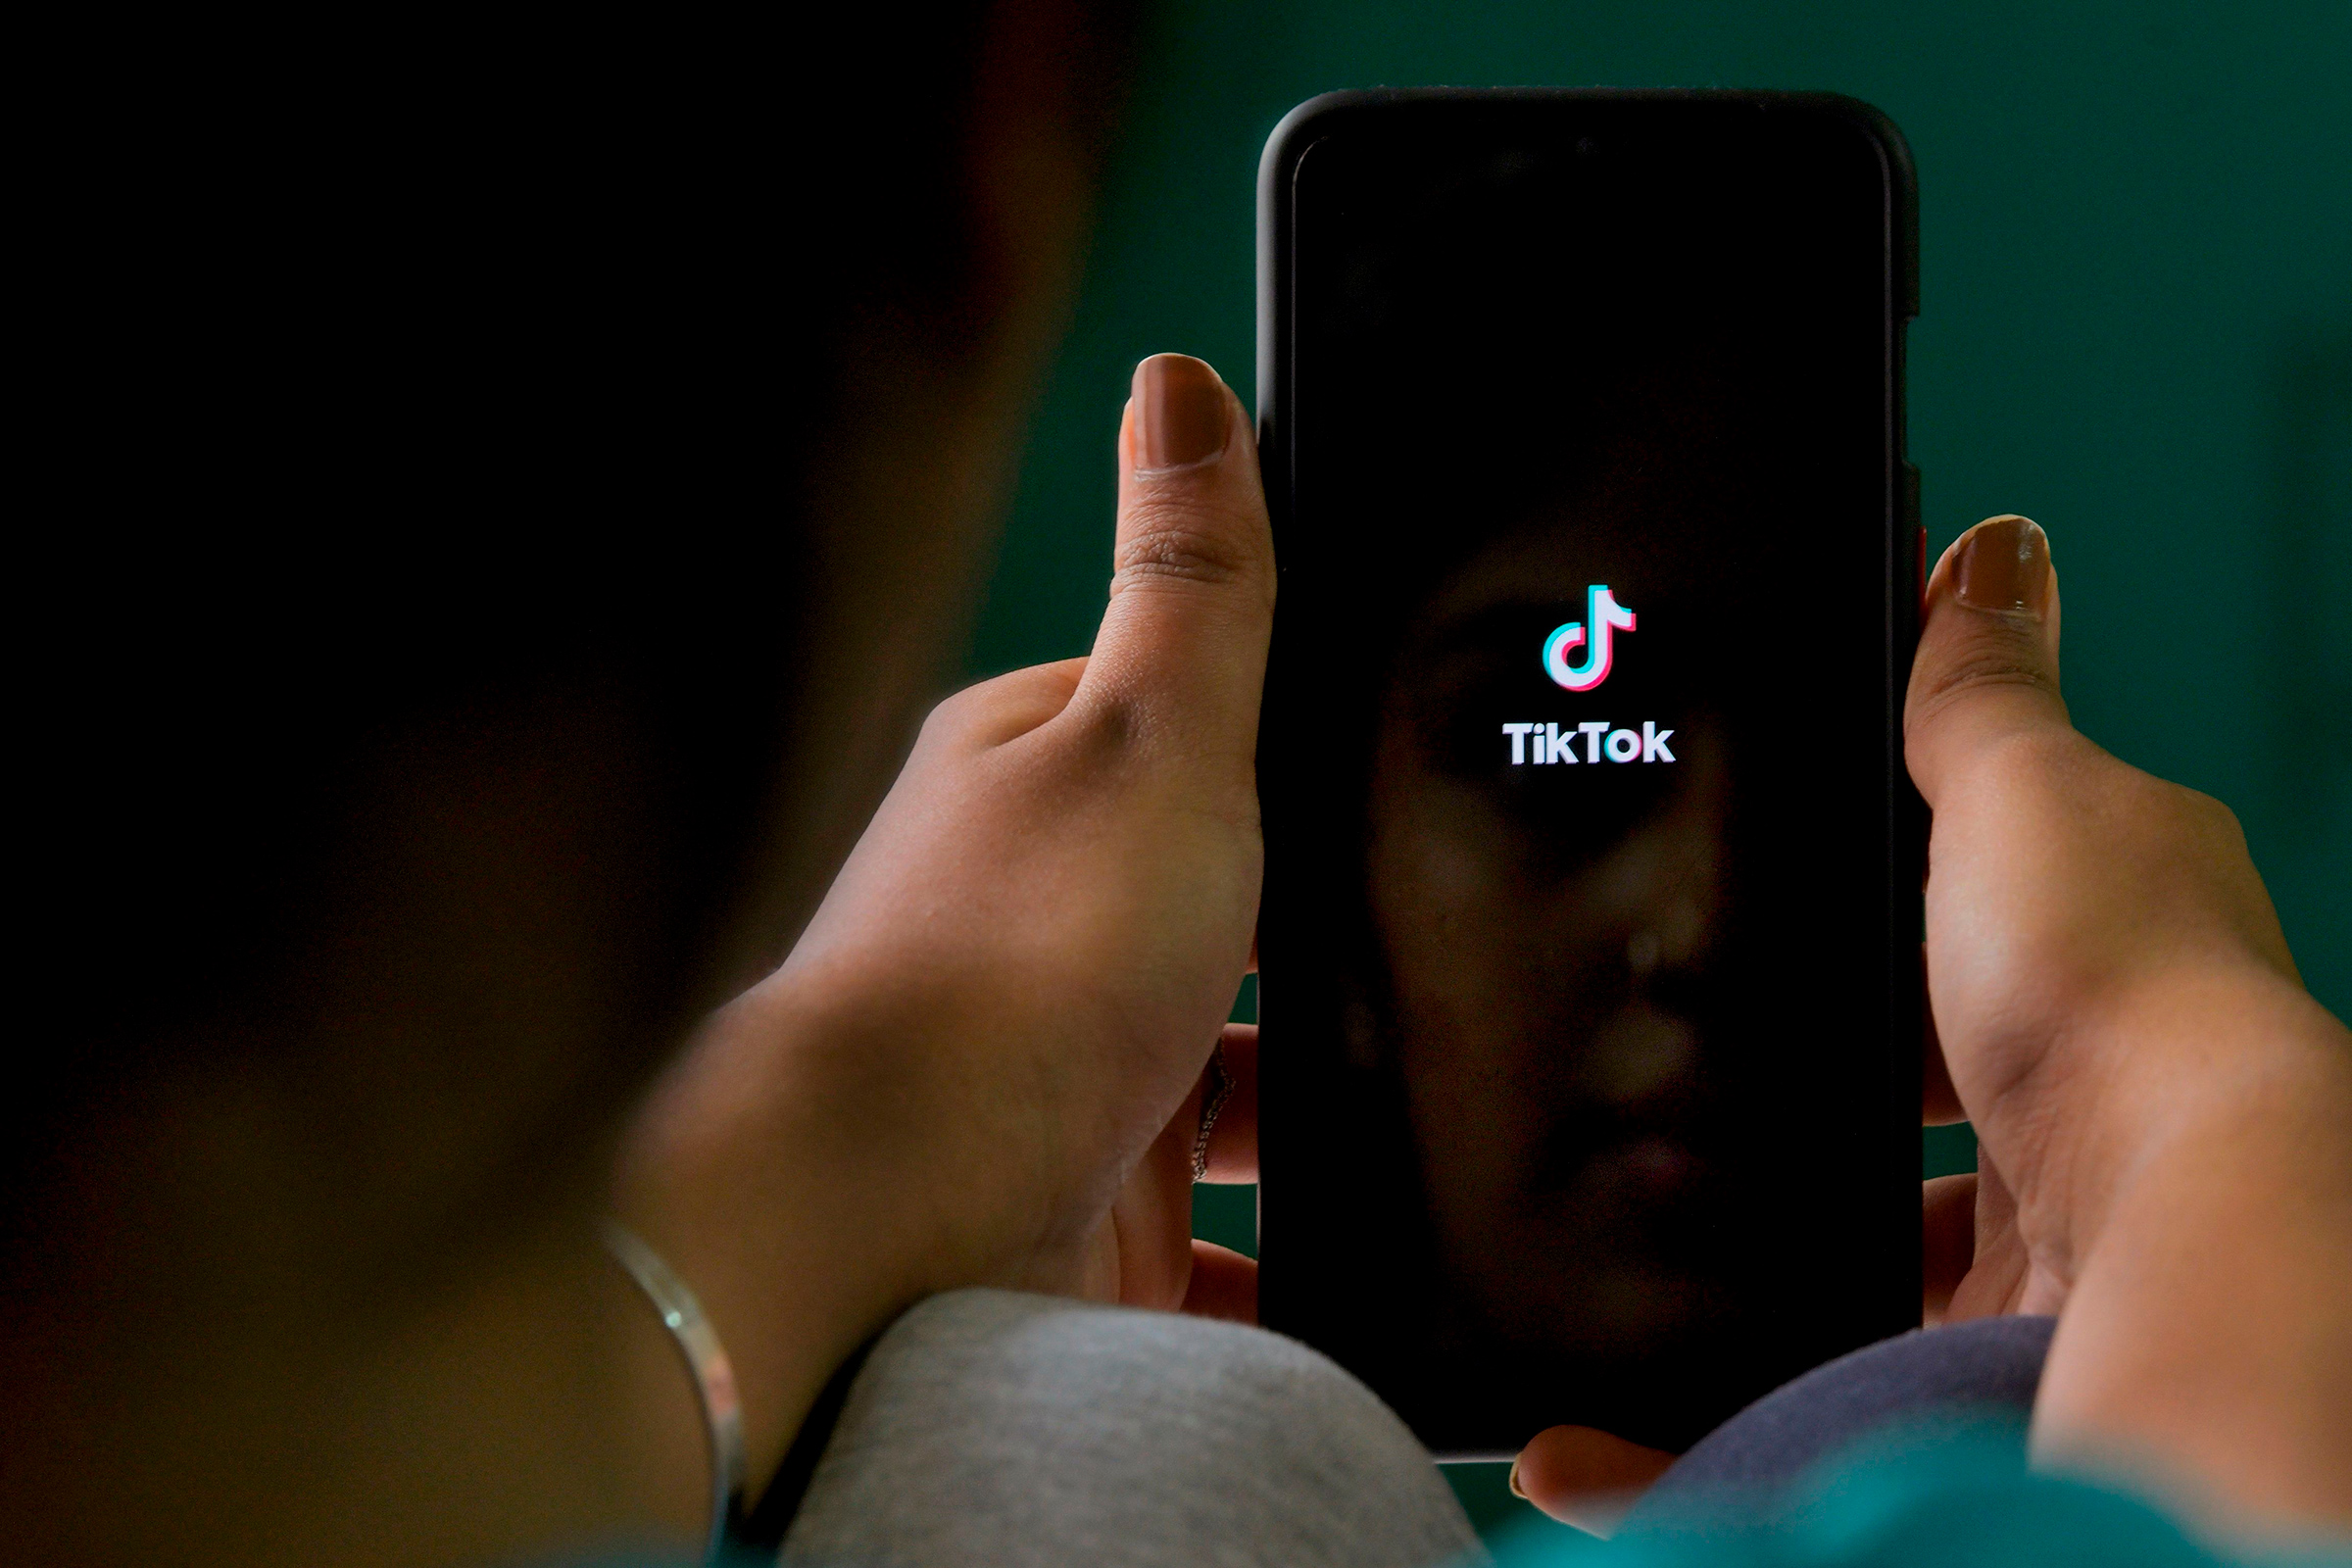 A dispute over the social-media platform TikTok is just the latest sore spot in worsening U.S.-China relations (Manjunath Kiran—AFP/Getty Images)